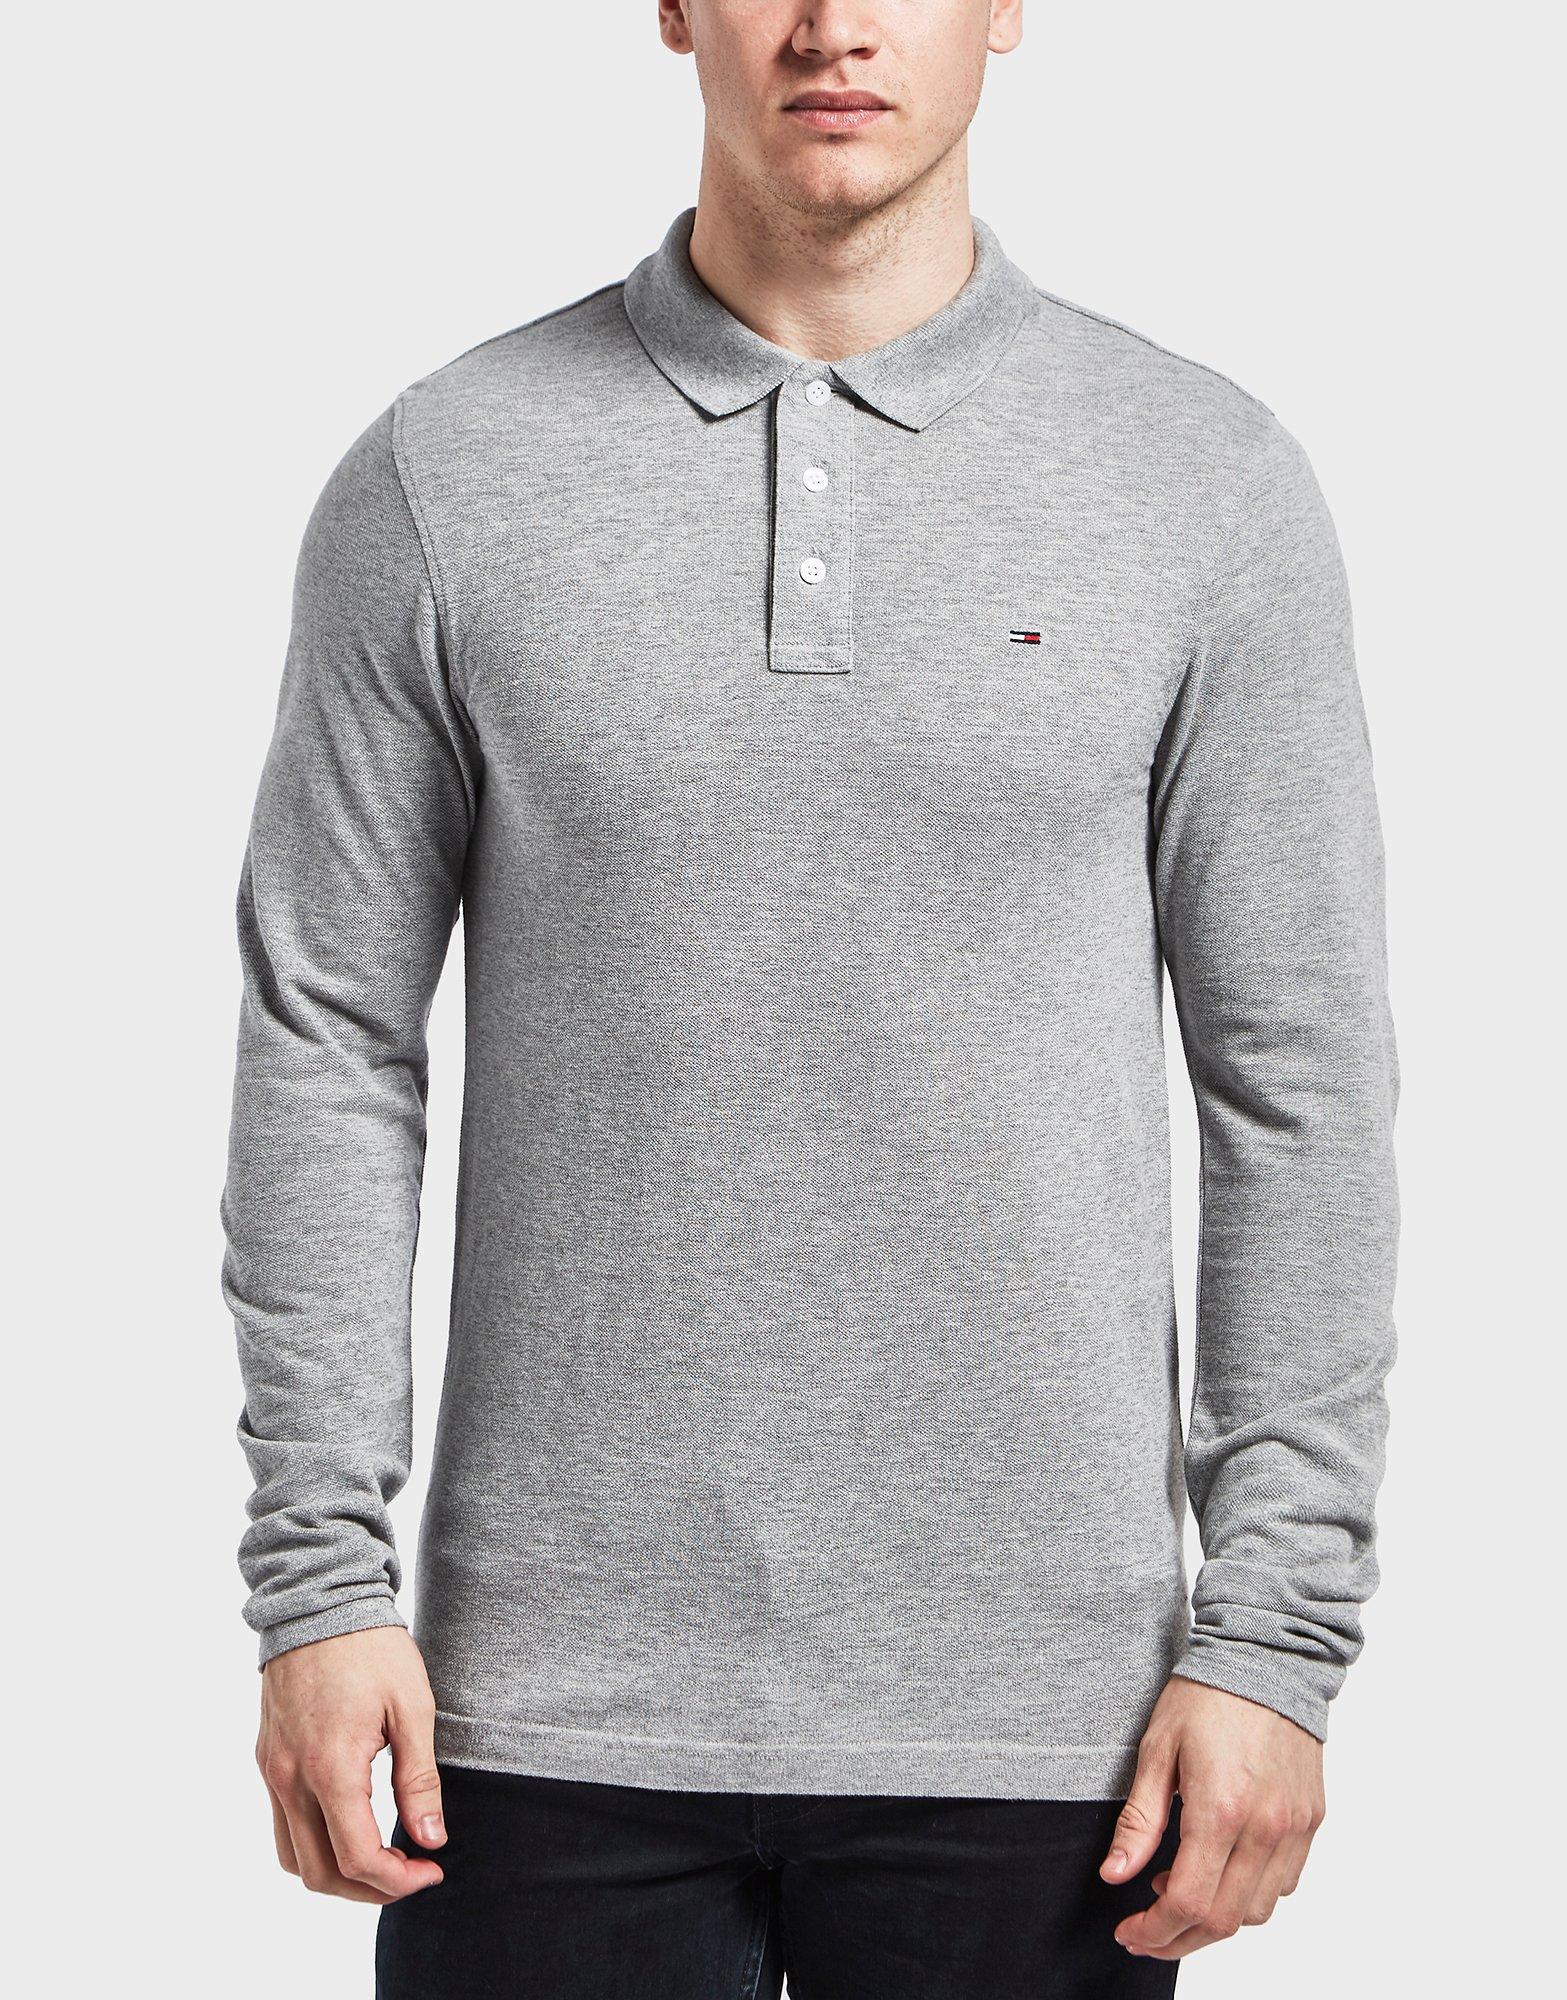 Tommy Hilfiger Cotton Long Sleeve Polo Shirt in Gray for Men - Lyst